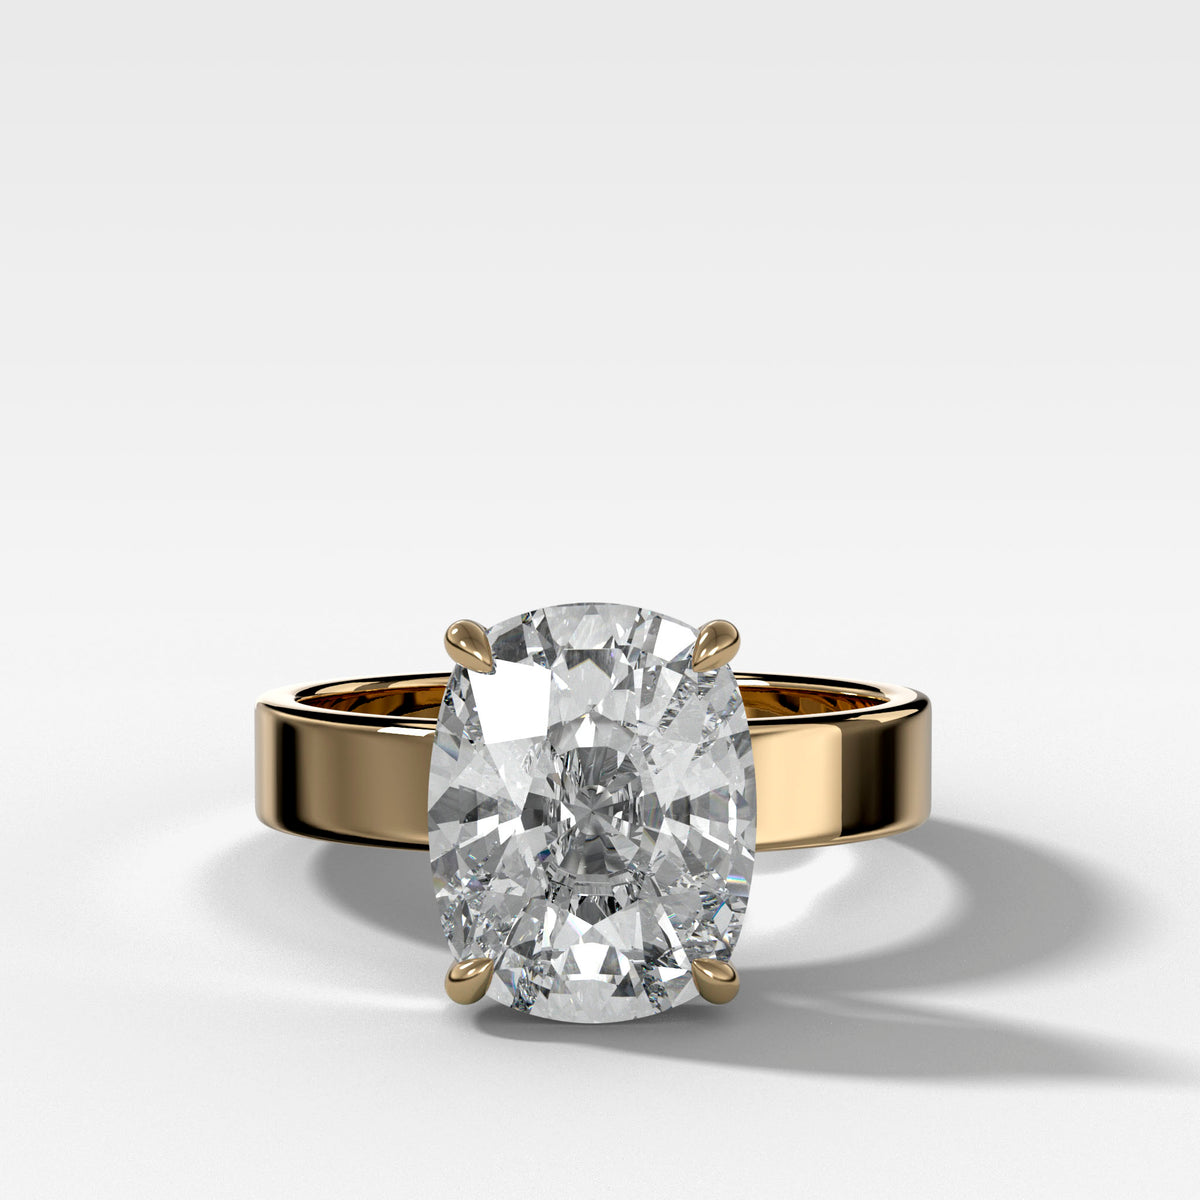 Finest Solitaire Engagement Ring With Elongated Cushion Cut Diamond